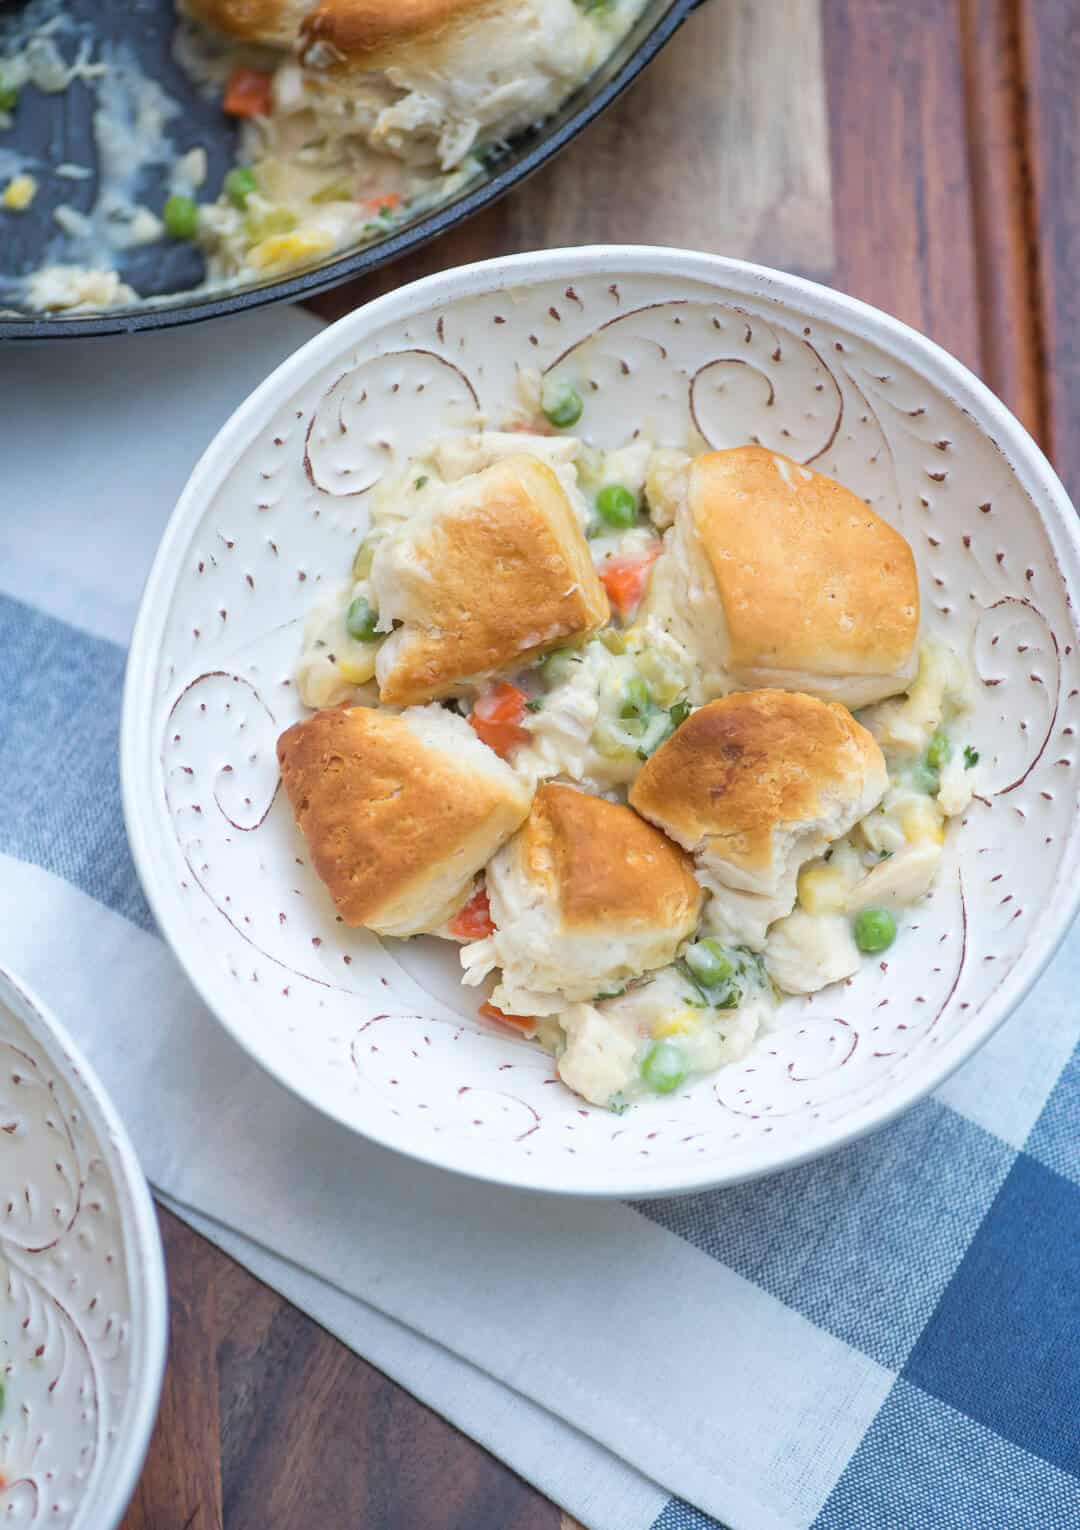  A white serving bowl filled with chicken pot pie with biscuit topping.